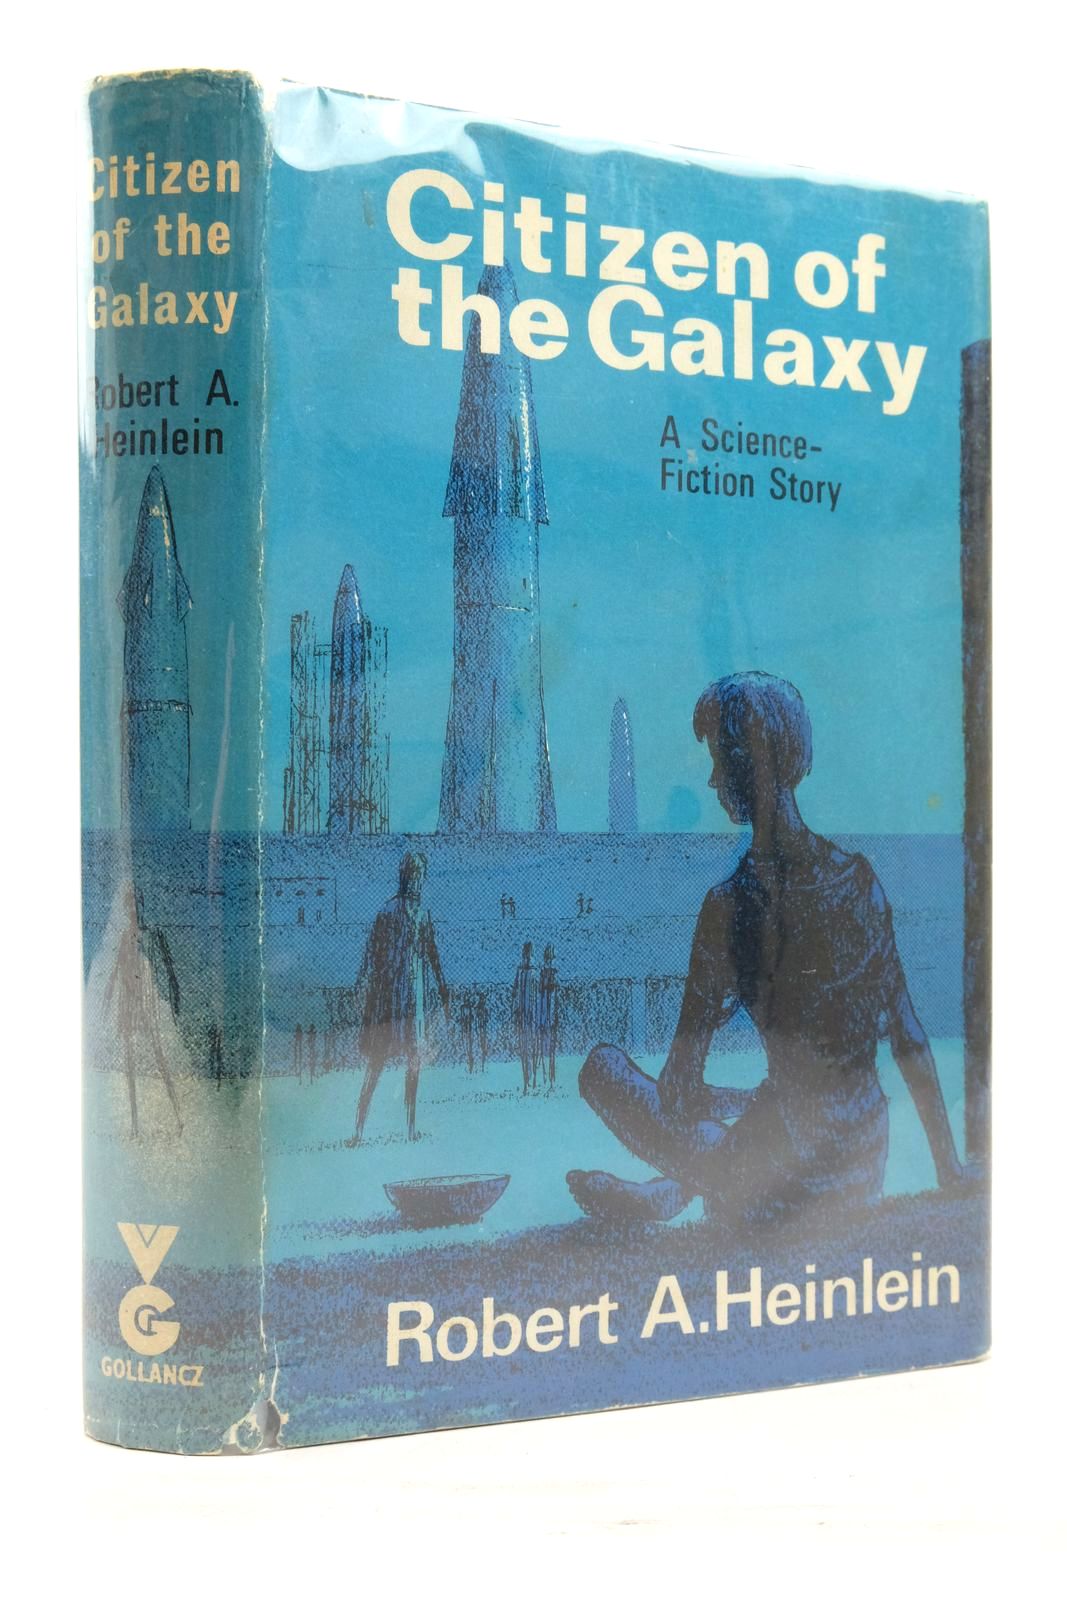 Photo of CITIZEN OF THE GALAXY written by Heinlein, Robert A. published by Victor Gollancz Ltd. (STOCK CODE: 2138006)  for sale by Stella & Rose's Books